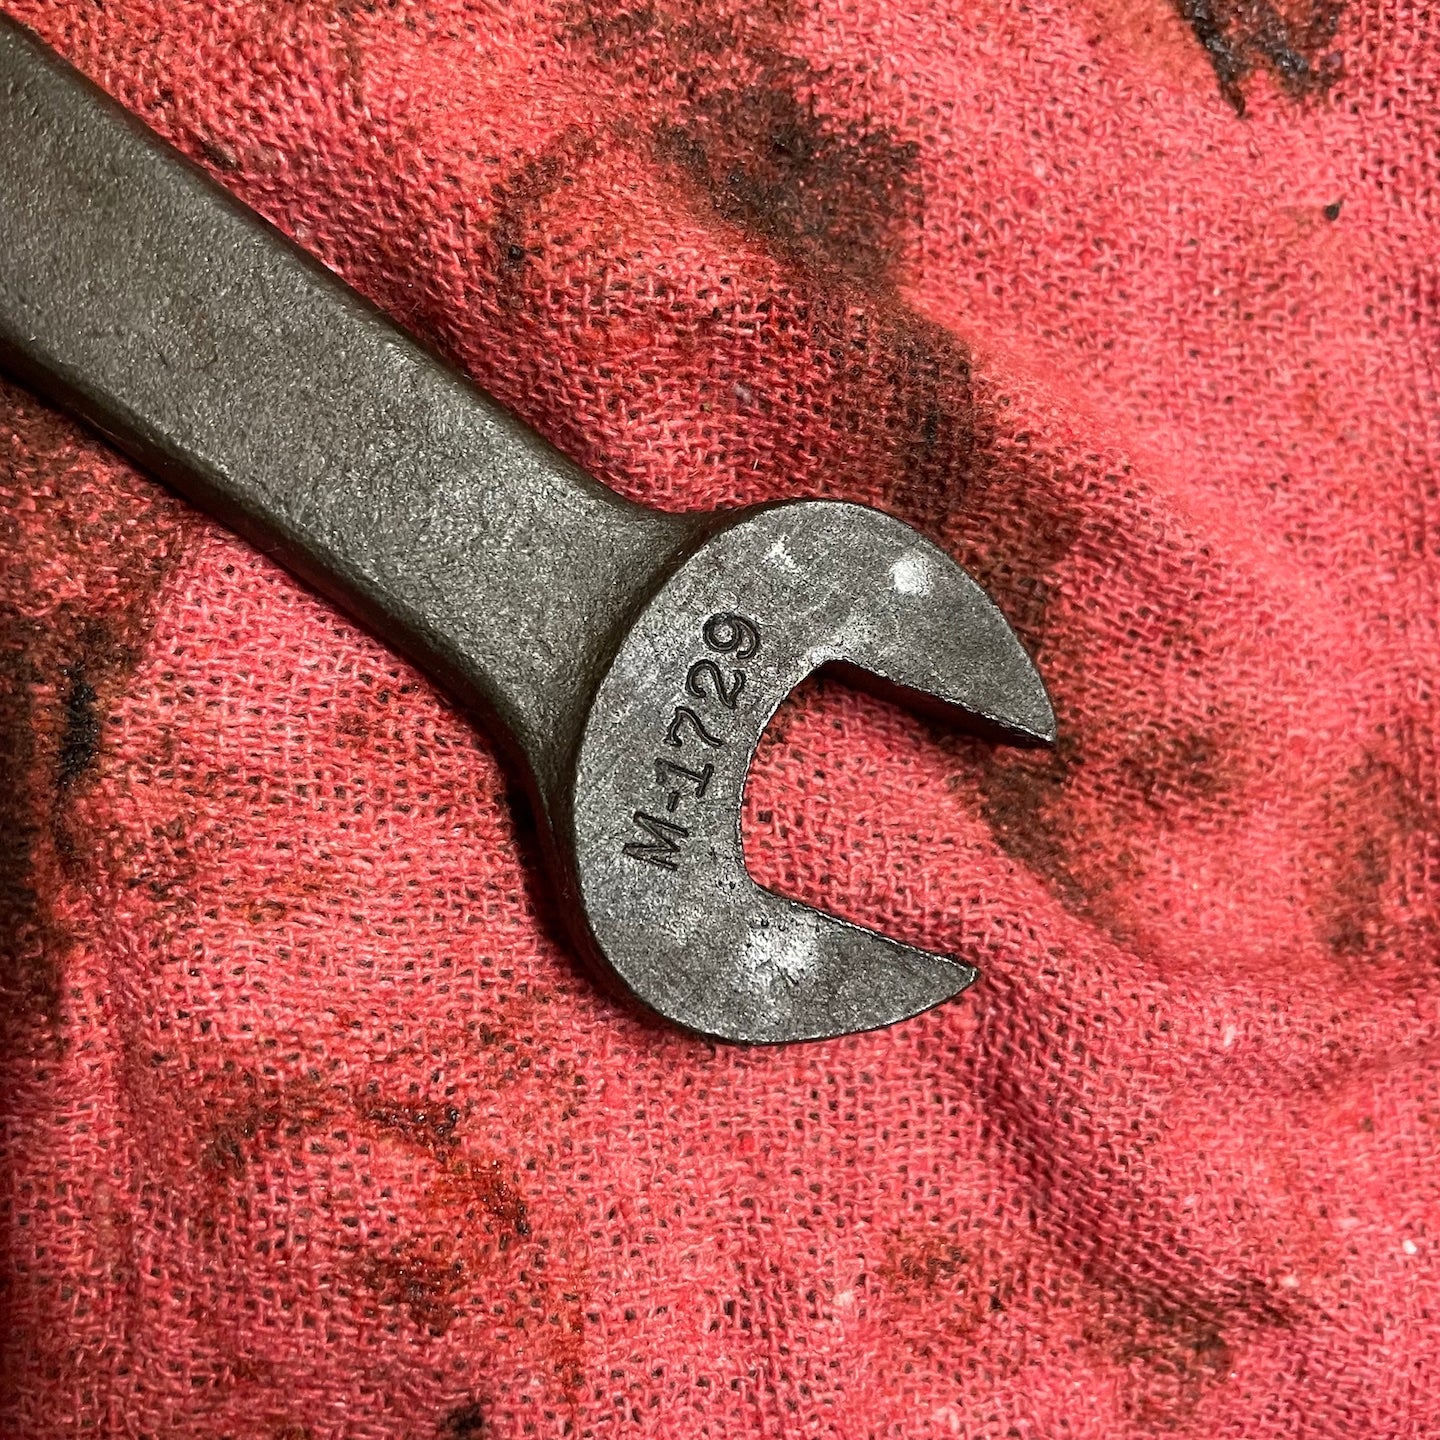 Billings NOS WWII Era Open End 5/8" x 3/4" Wrench